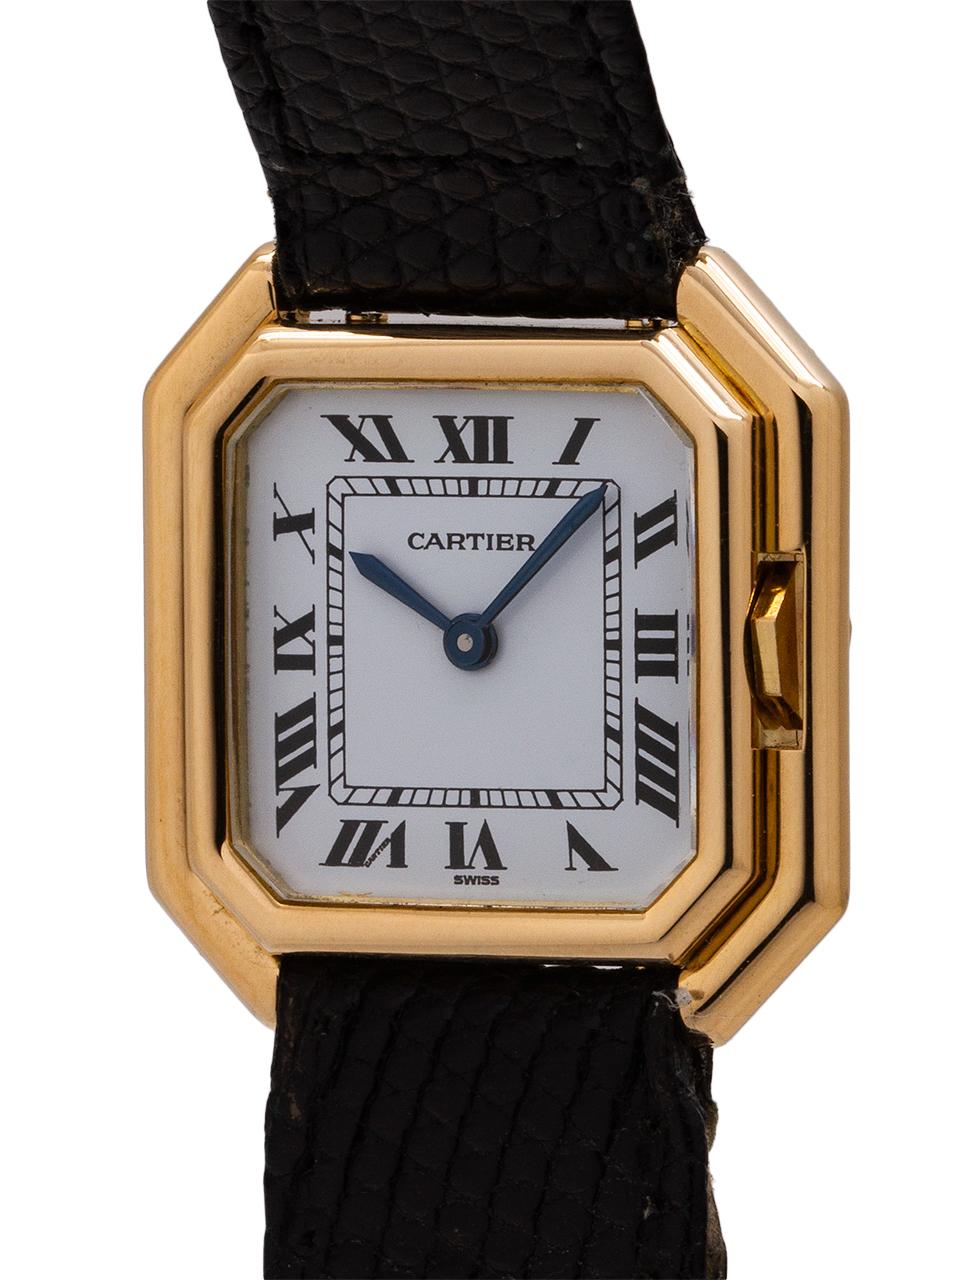 Vintage Lady Cartier 18K YG “Ceinture” model circa 1970’s. Featuring 25 x 25mm square case with wide stepped bezel, cut corners, and protected crown. Mineral glass crystal, glossy white original dial with classic black Roman figures and blued steel